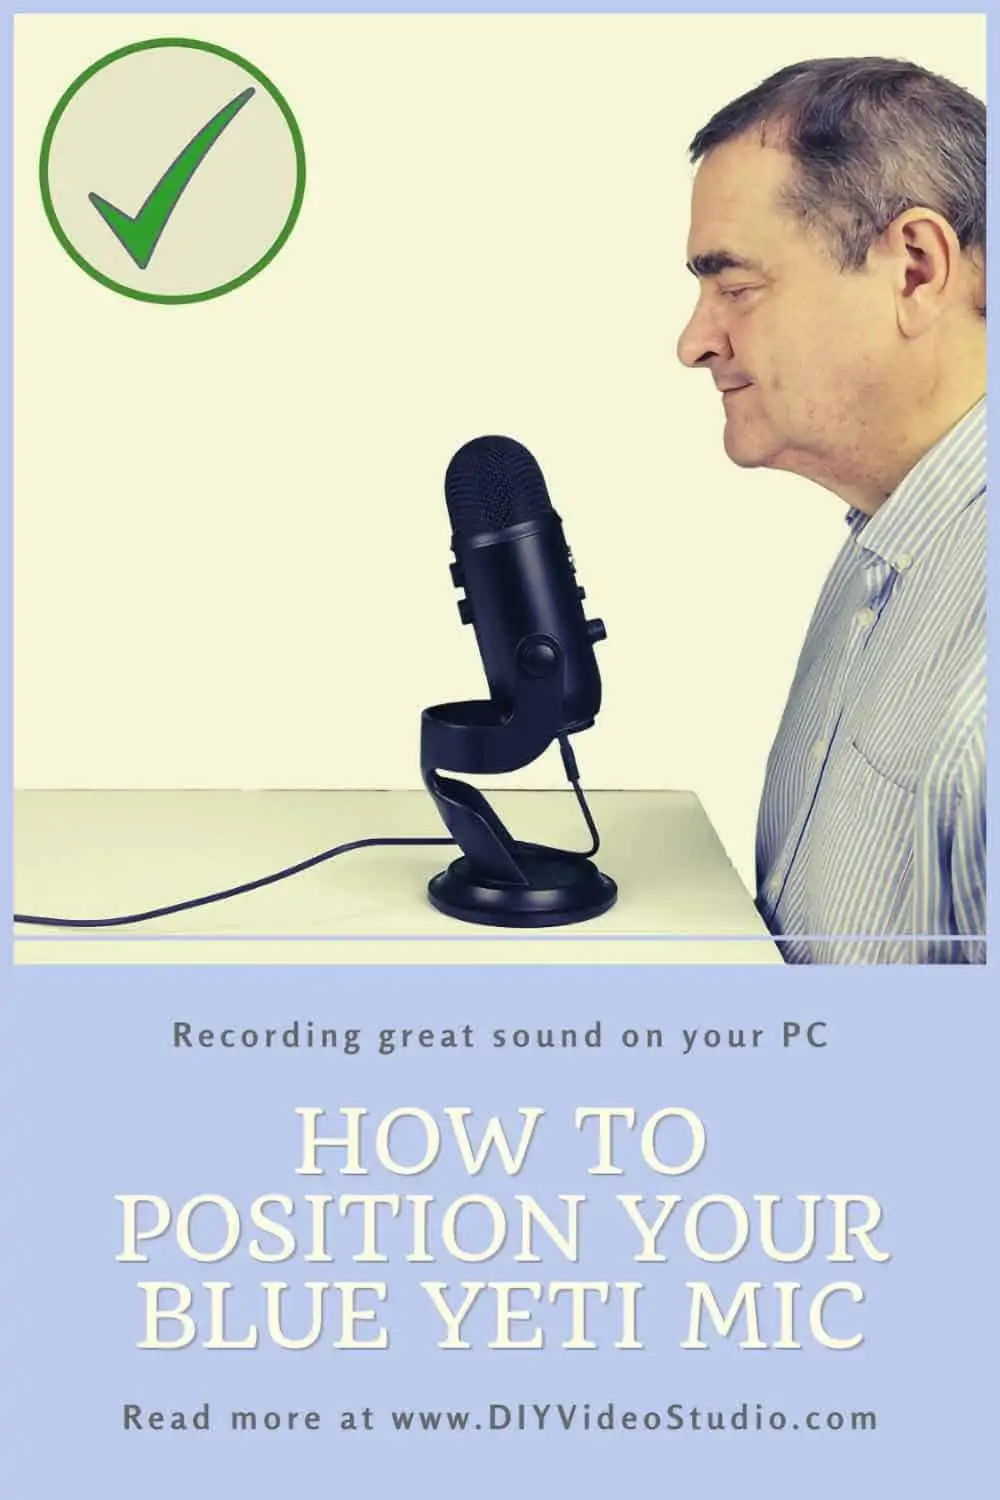 How to position your Blue Yeti Mic - Pinterest Graphic